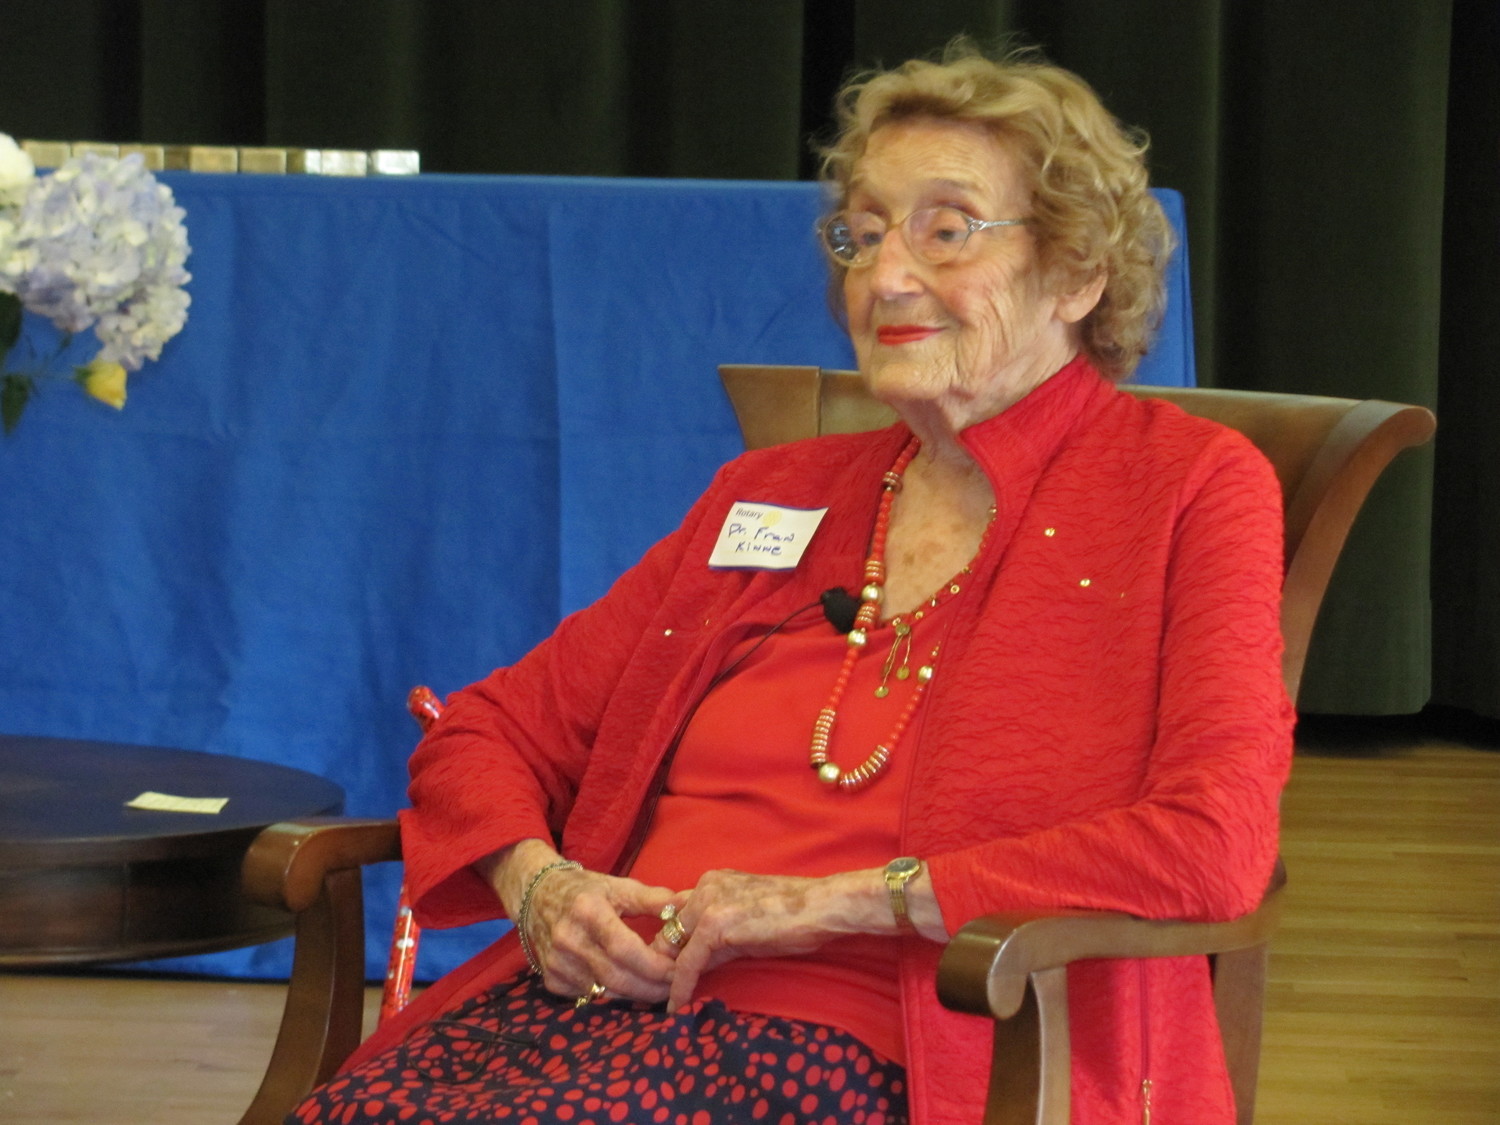 Dr. Frances Kinne received a Lifetime Achievement Award at the event for her pioneering efforts within Rotary and society as a whole.